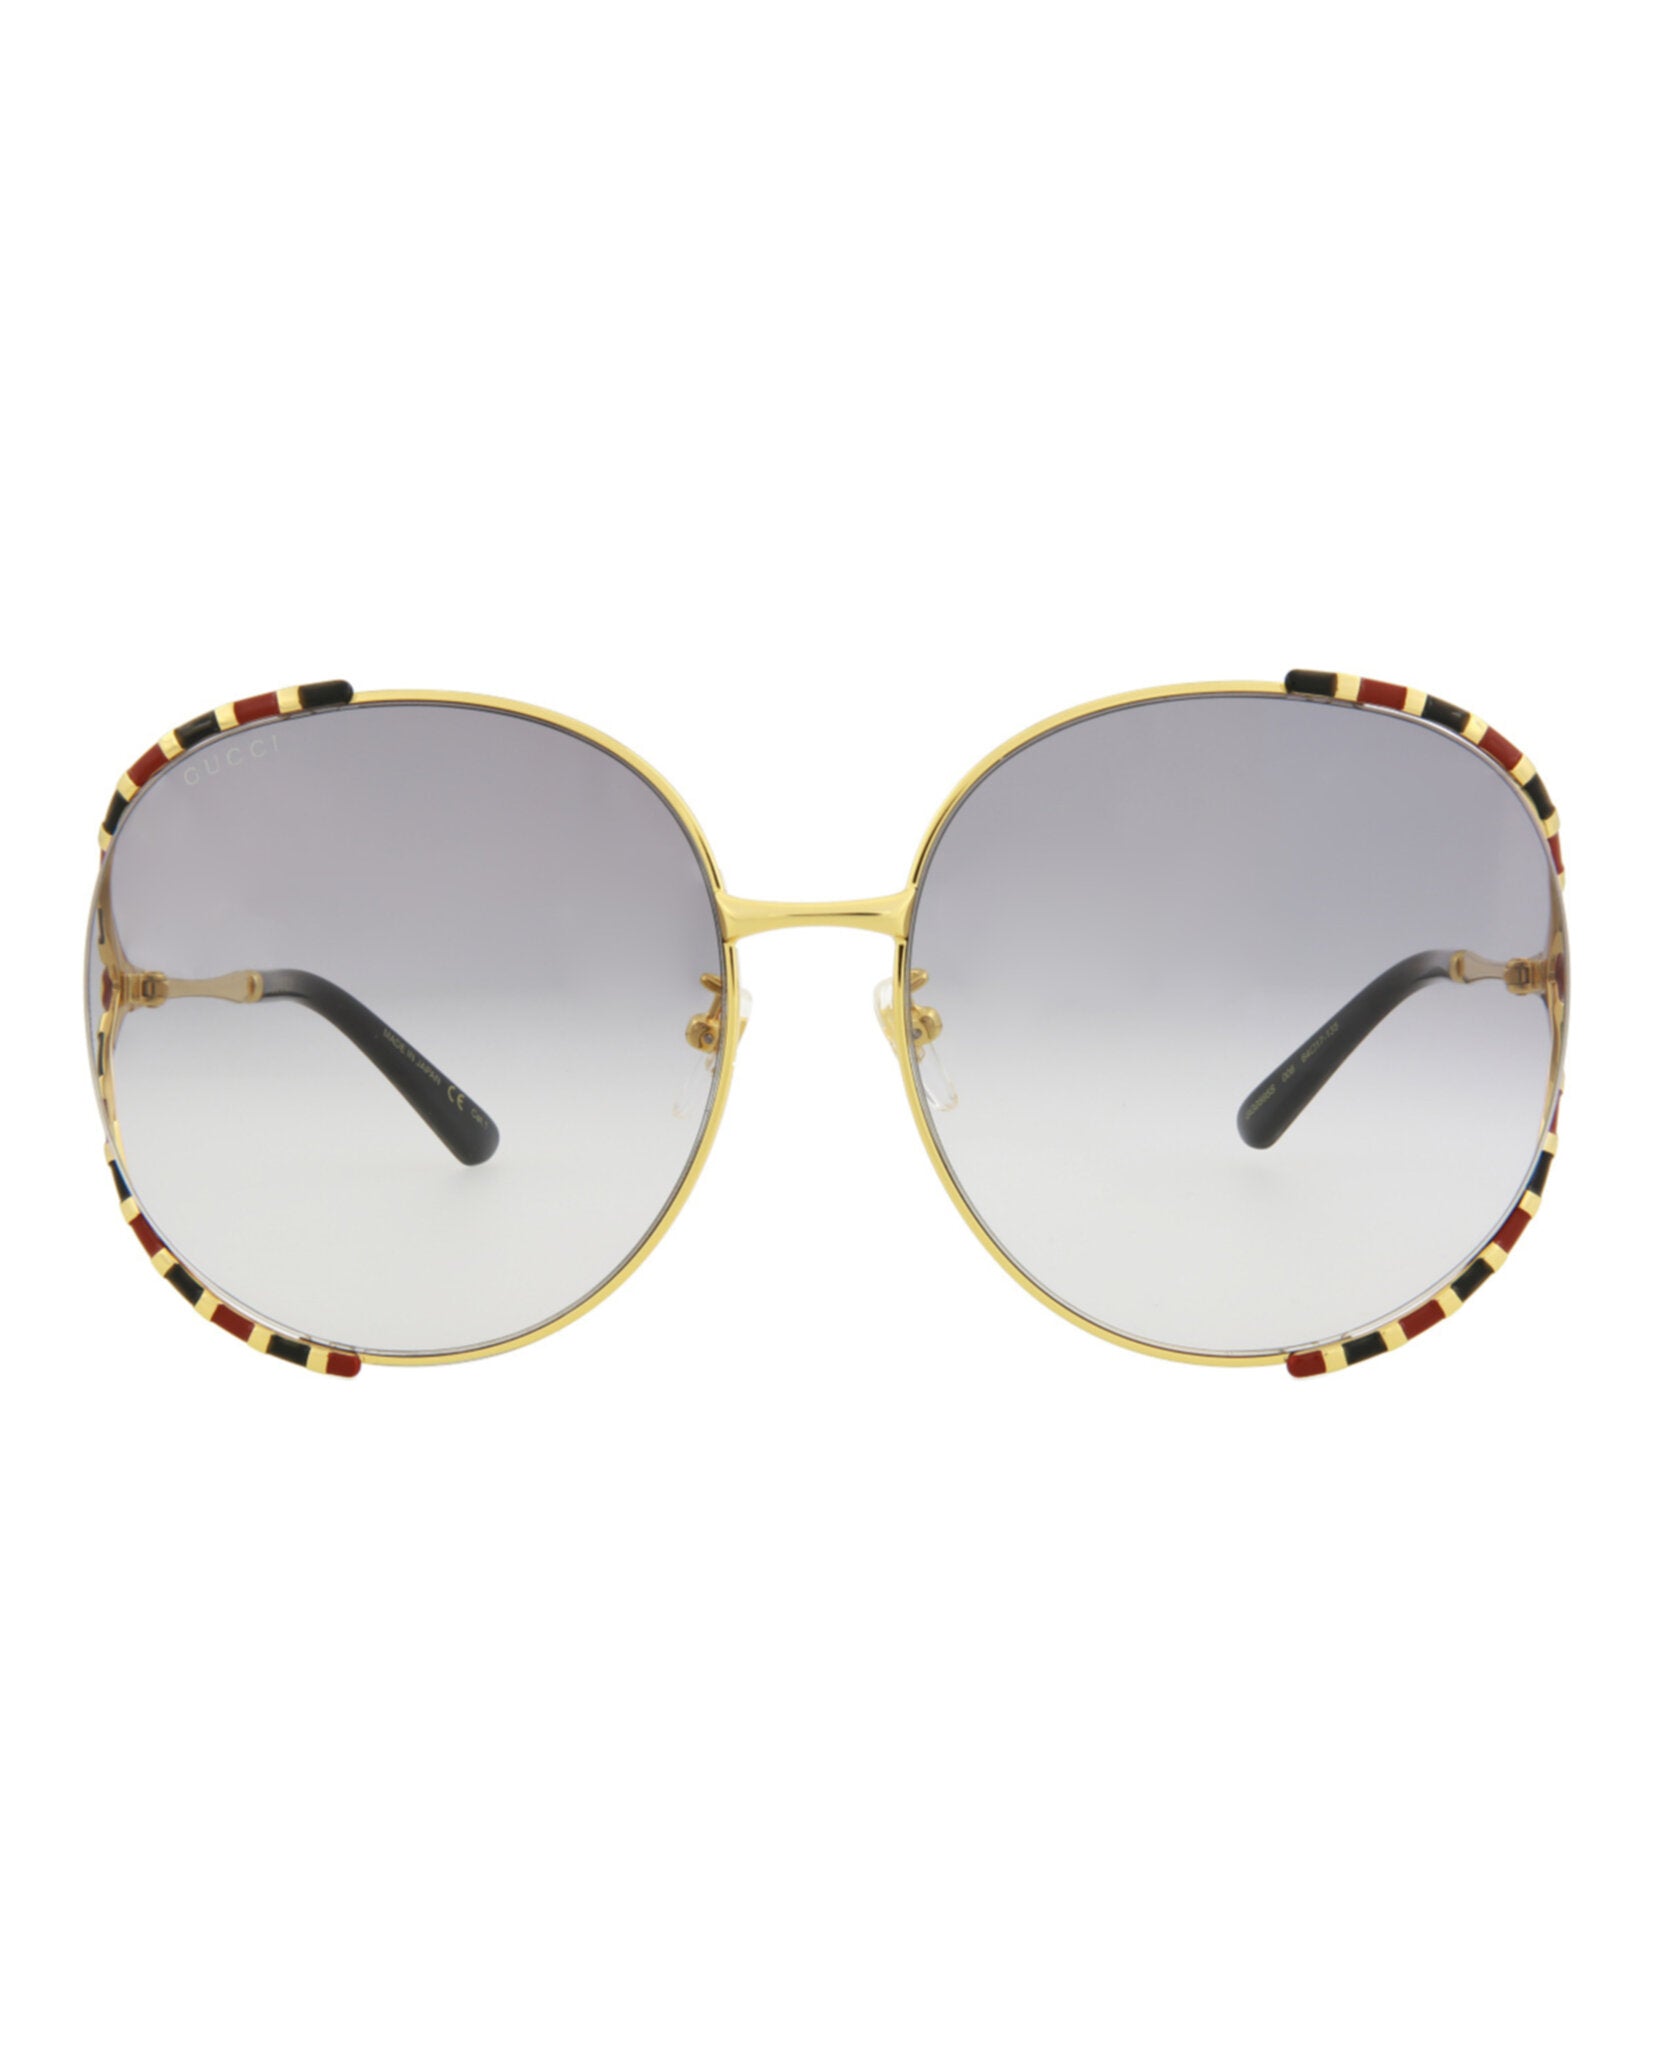 title:Gucci Women's GG0595S-30008116006 Novelty Sunglasses;color:Gold Gold Grey